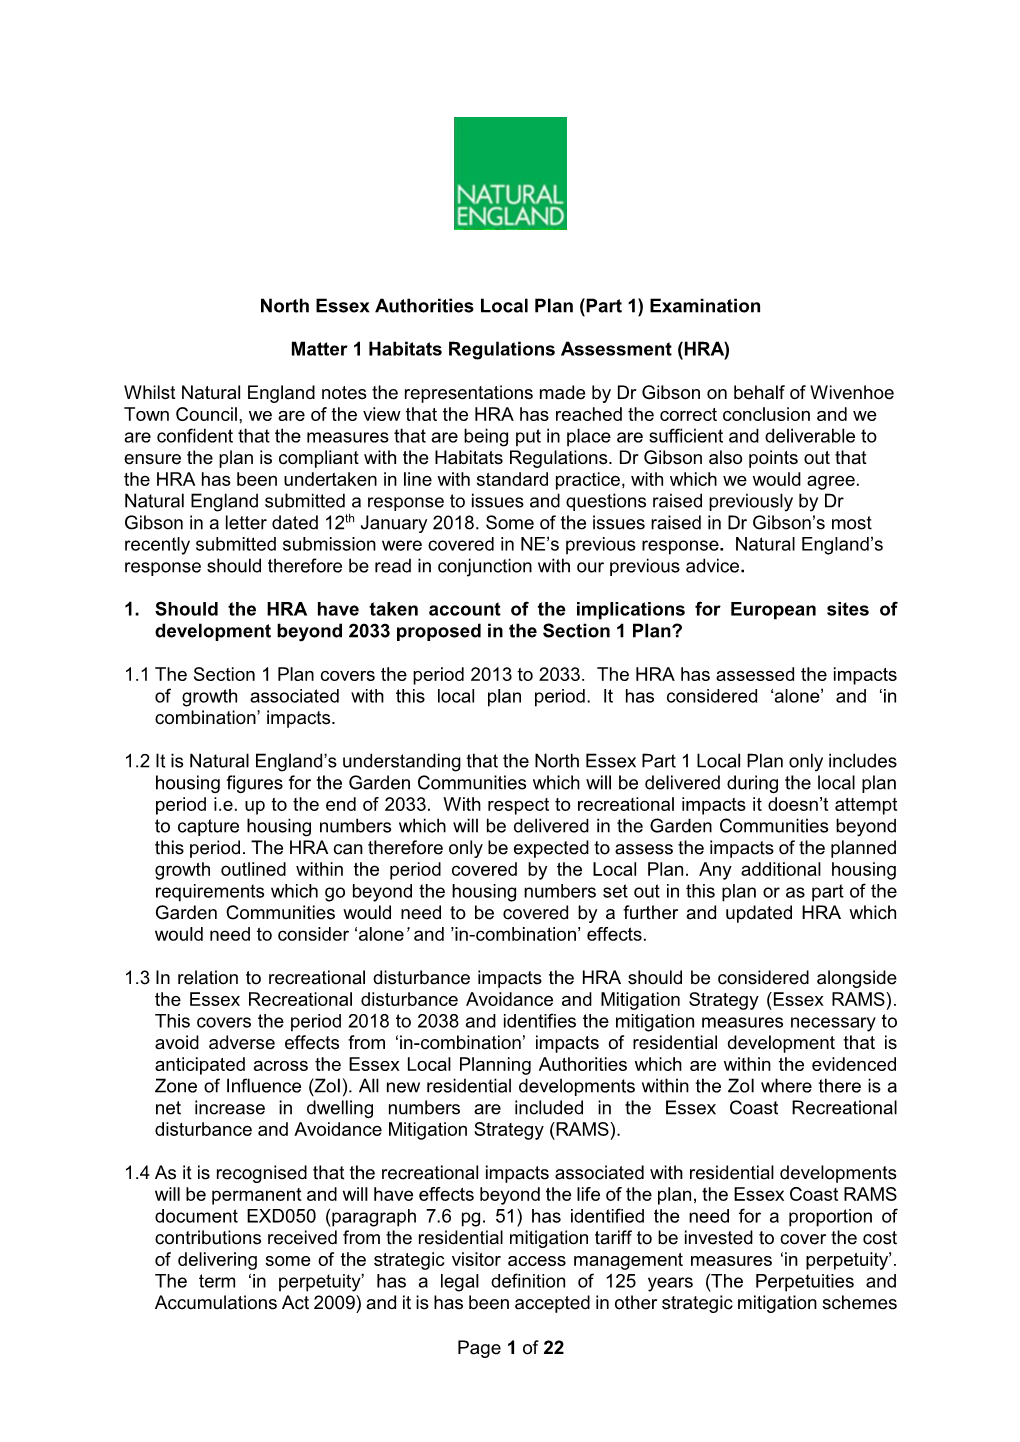 Page 1 of 22 North Essex Authorities Local Plan (Part 1) Examination